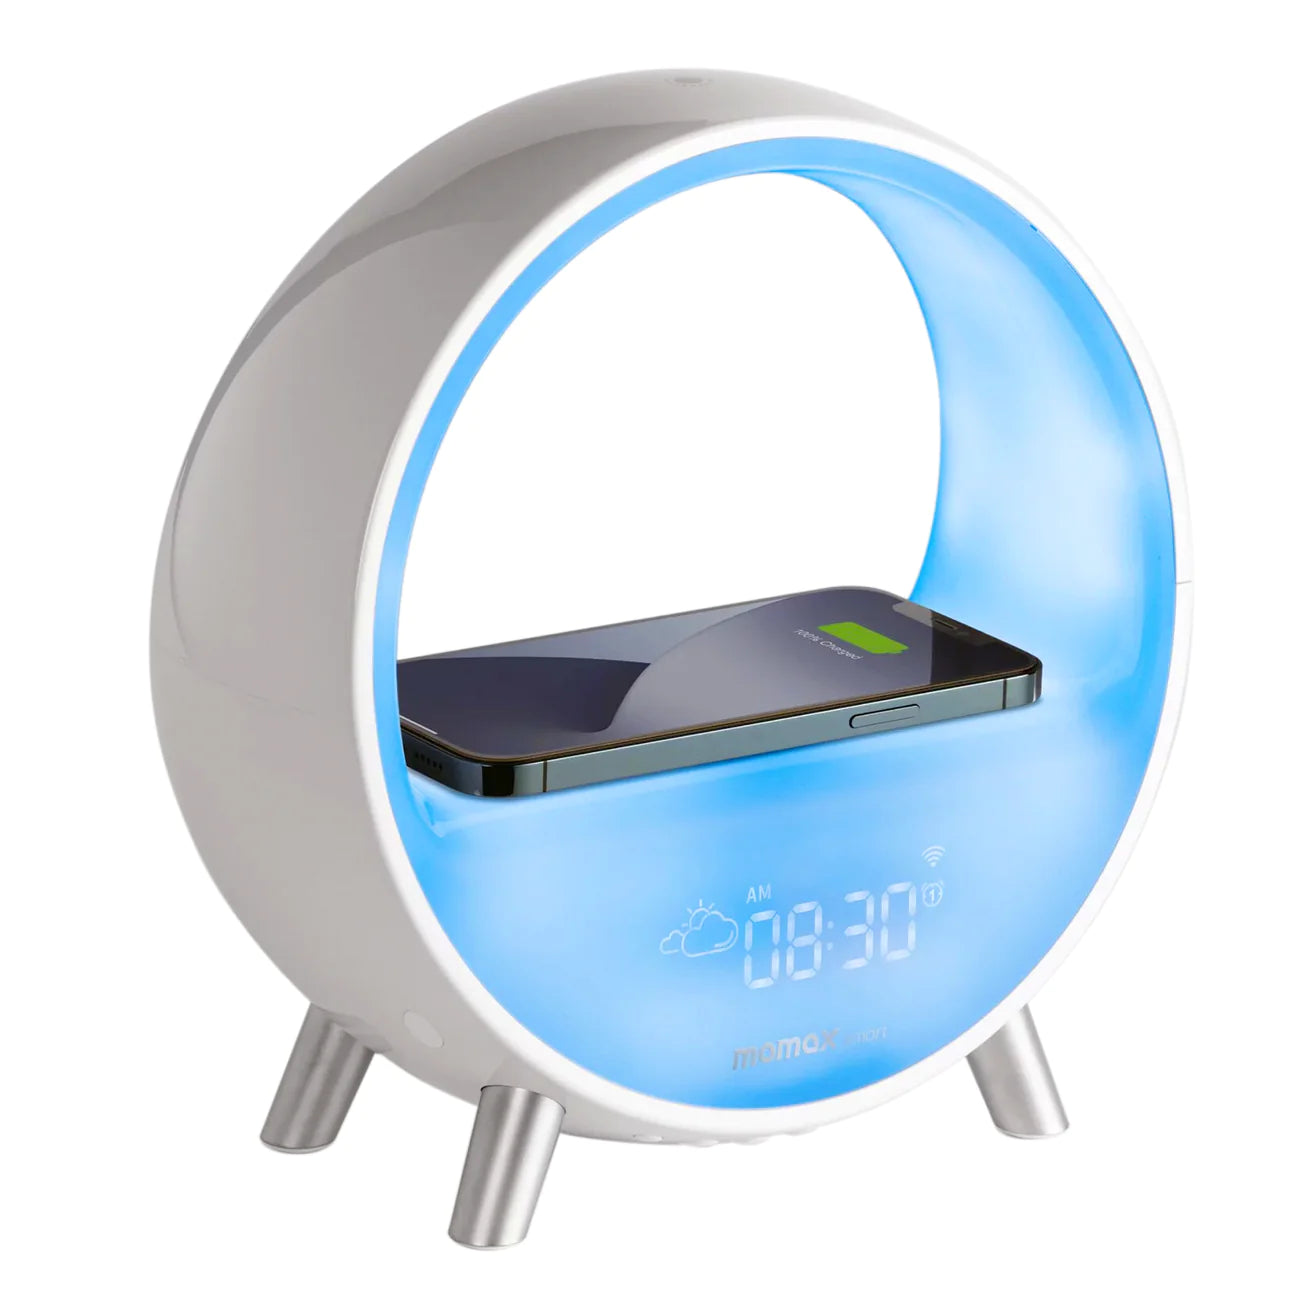 Momax Zense Lamp Clock With Wireless Charger